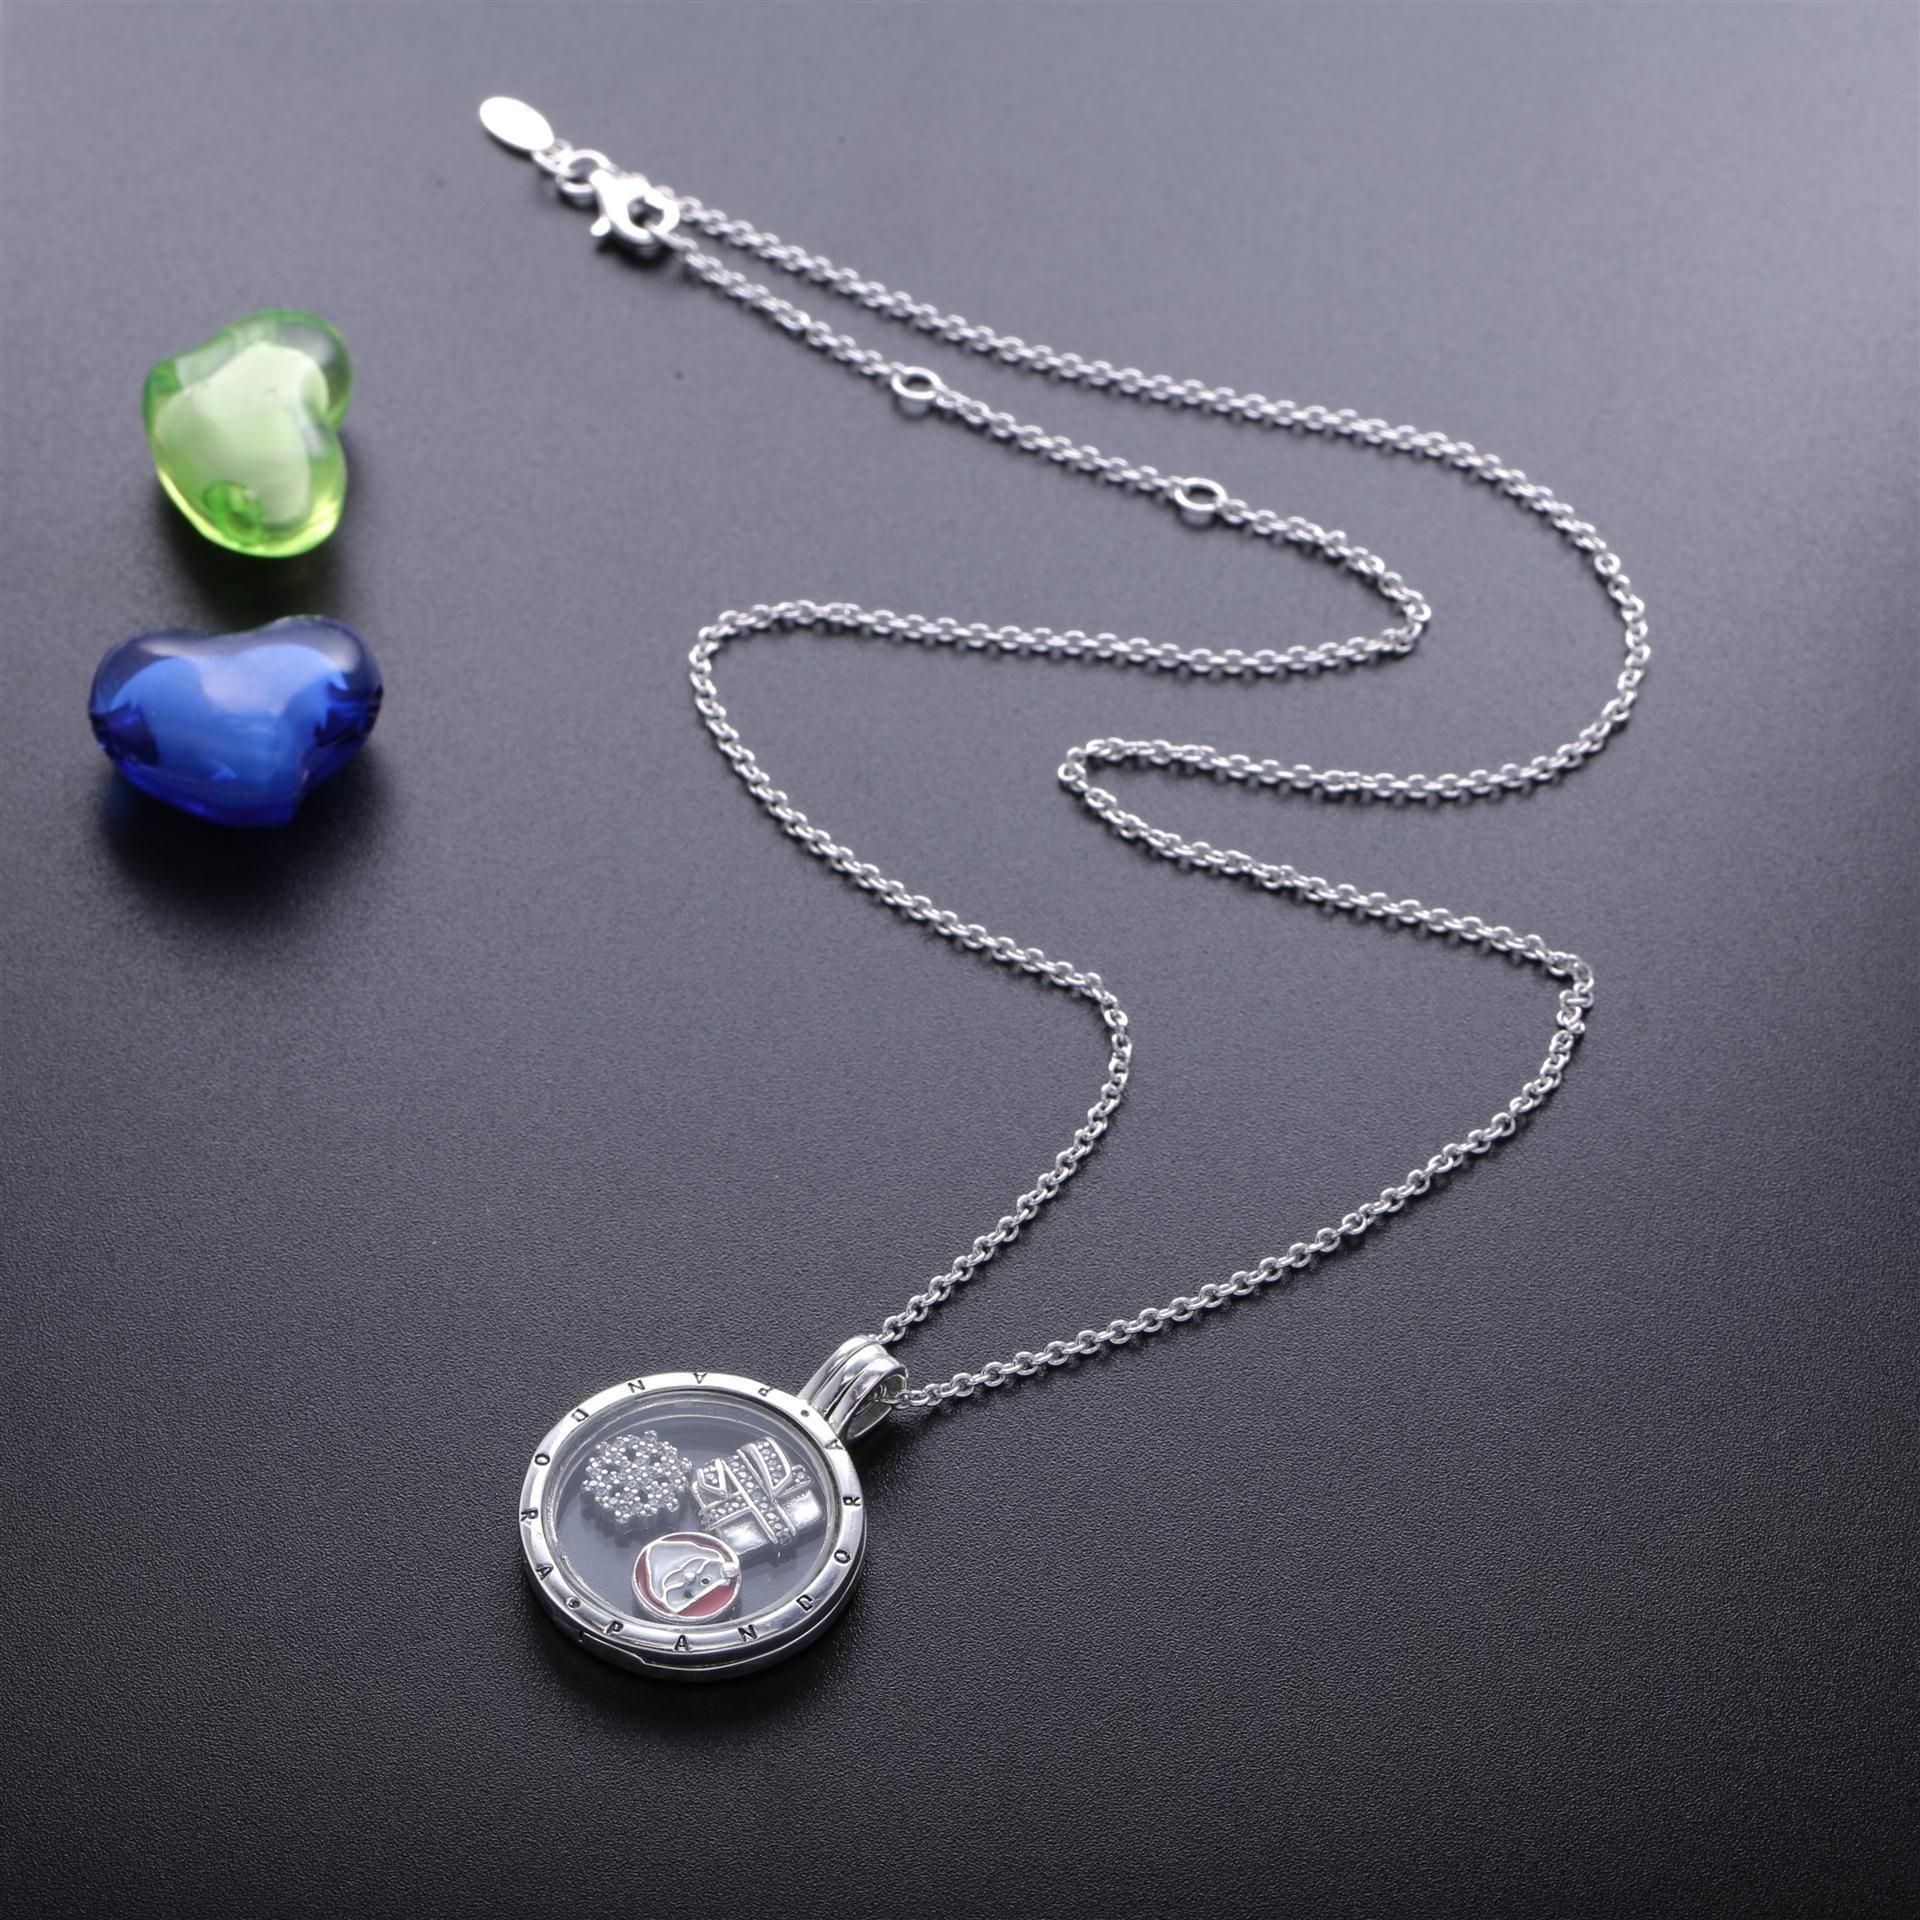 Pandora Memory Necklace For Any Occasion Pertaining To Best And Newest Love &amp; Family Petite Locket Charms Necklaces (View 21 of 25)